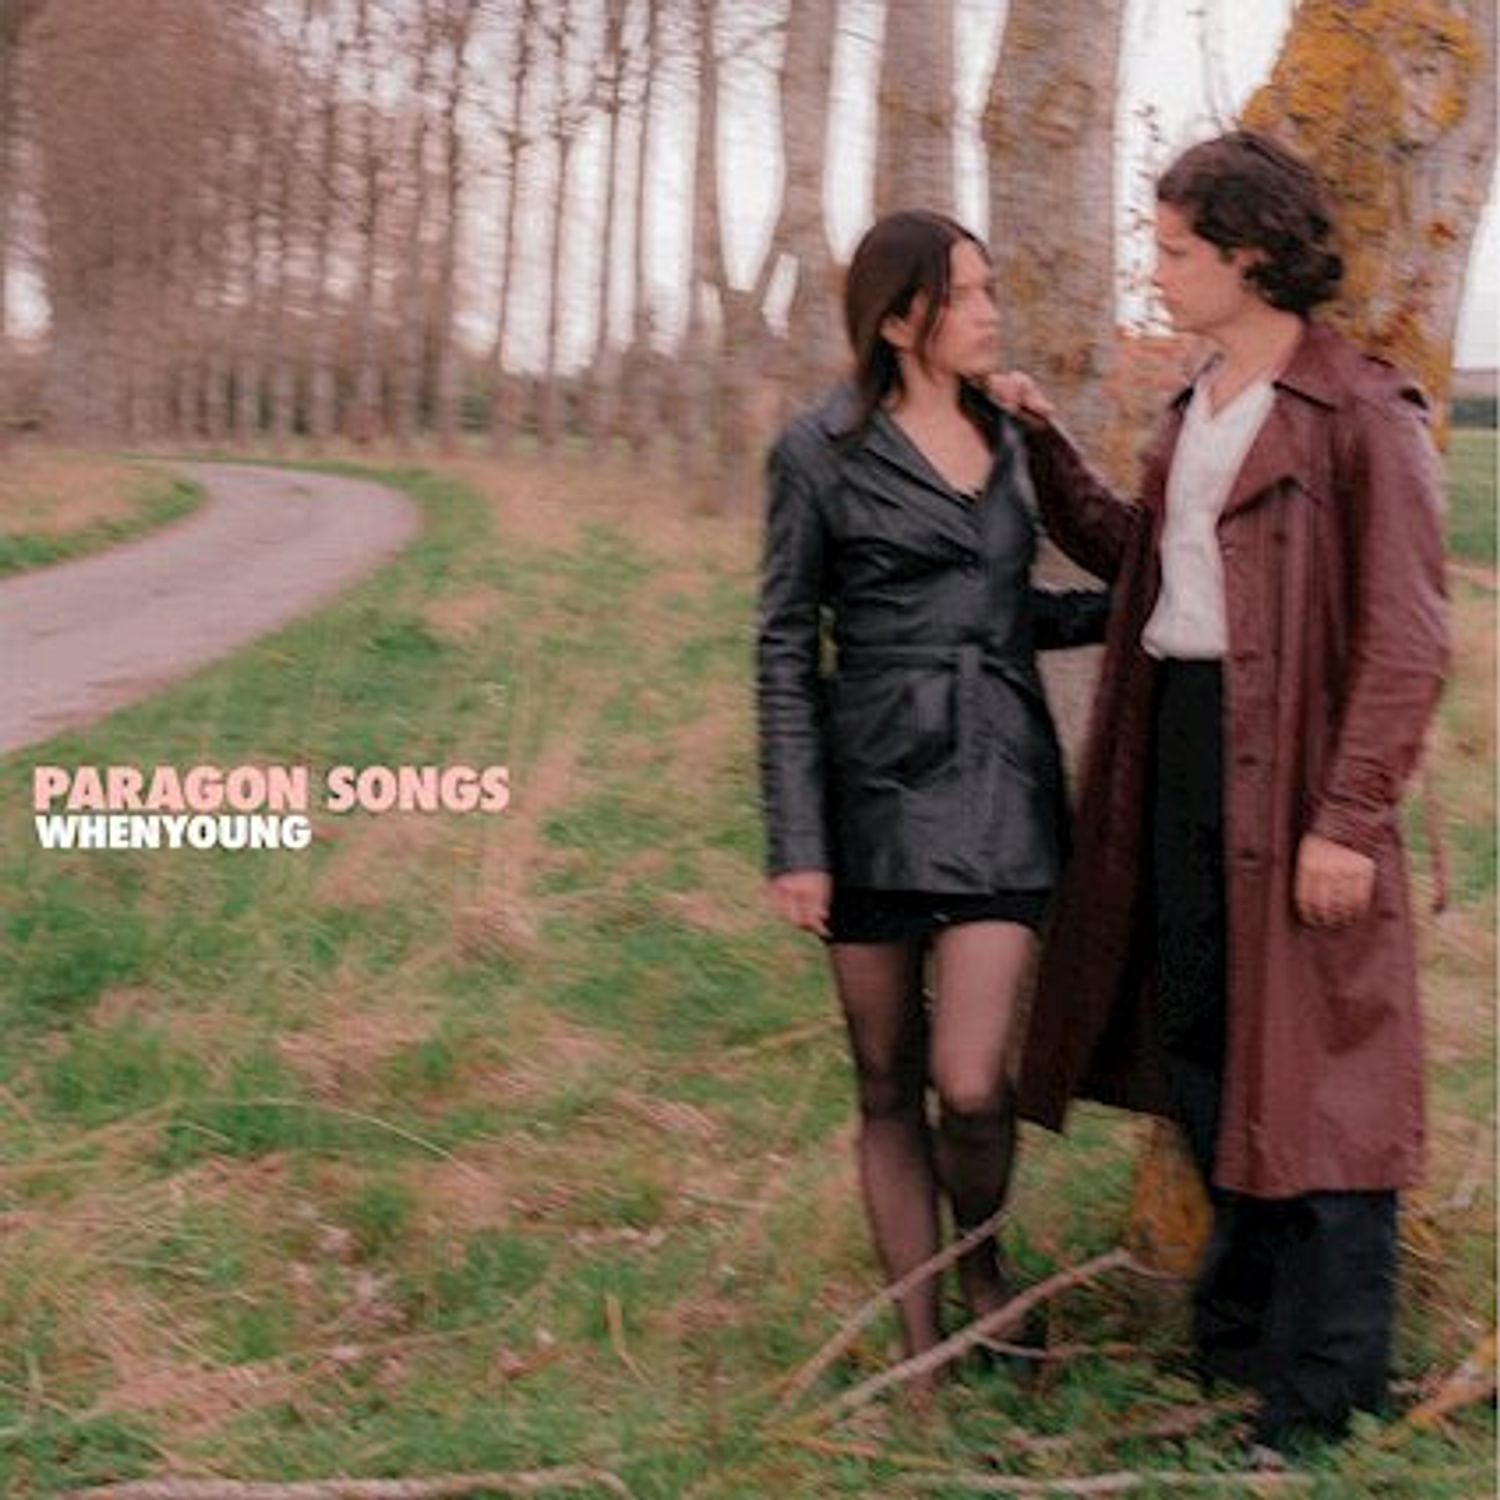 Whenyoung - Paragon Songs